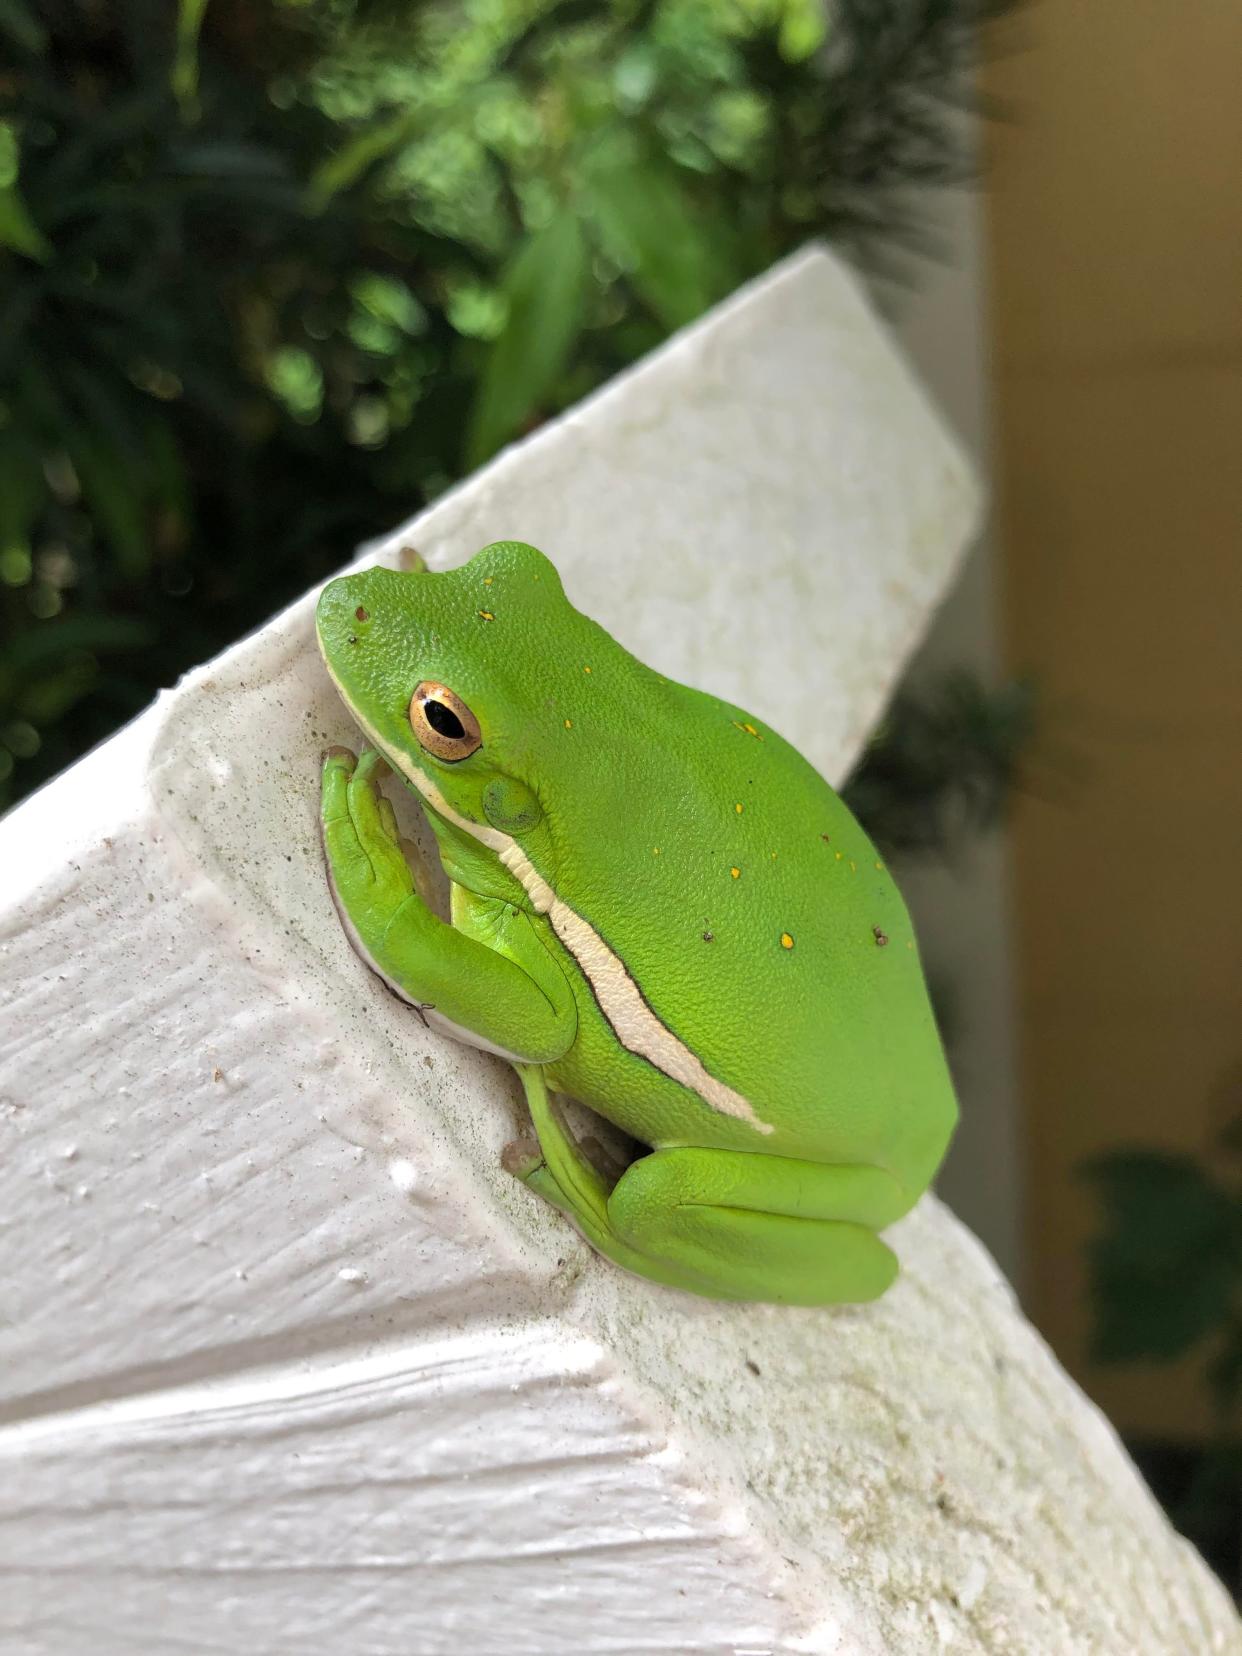 Green treefrogs (Hyla cinerea) are often found climbing up windows or wedged into door jams.